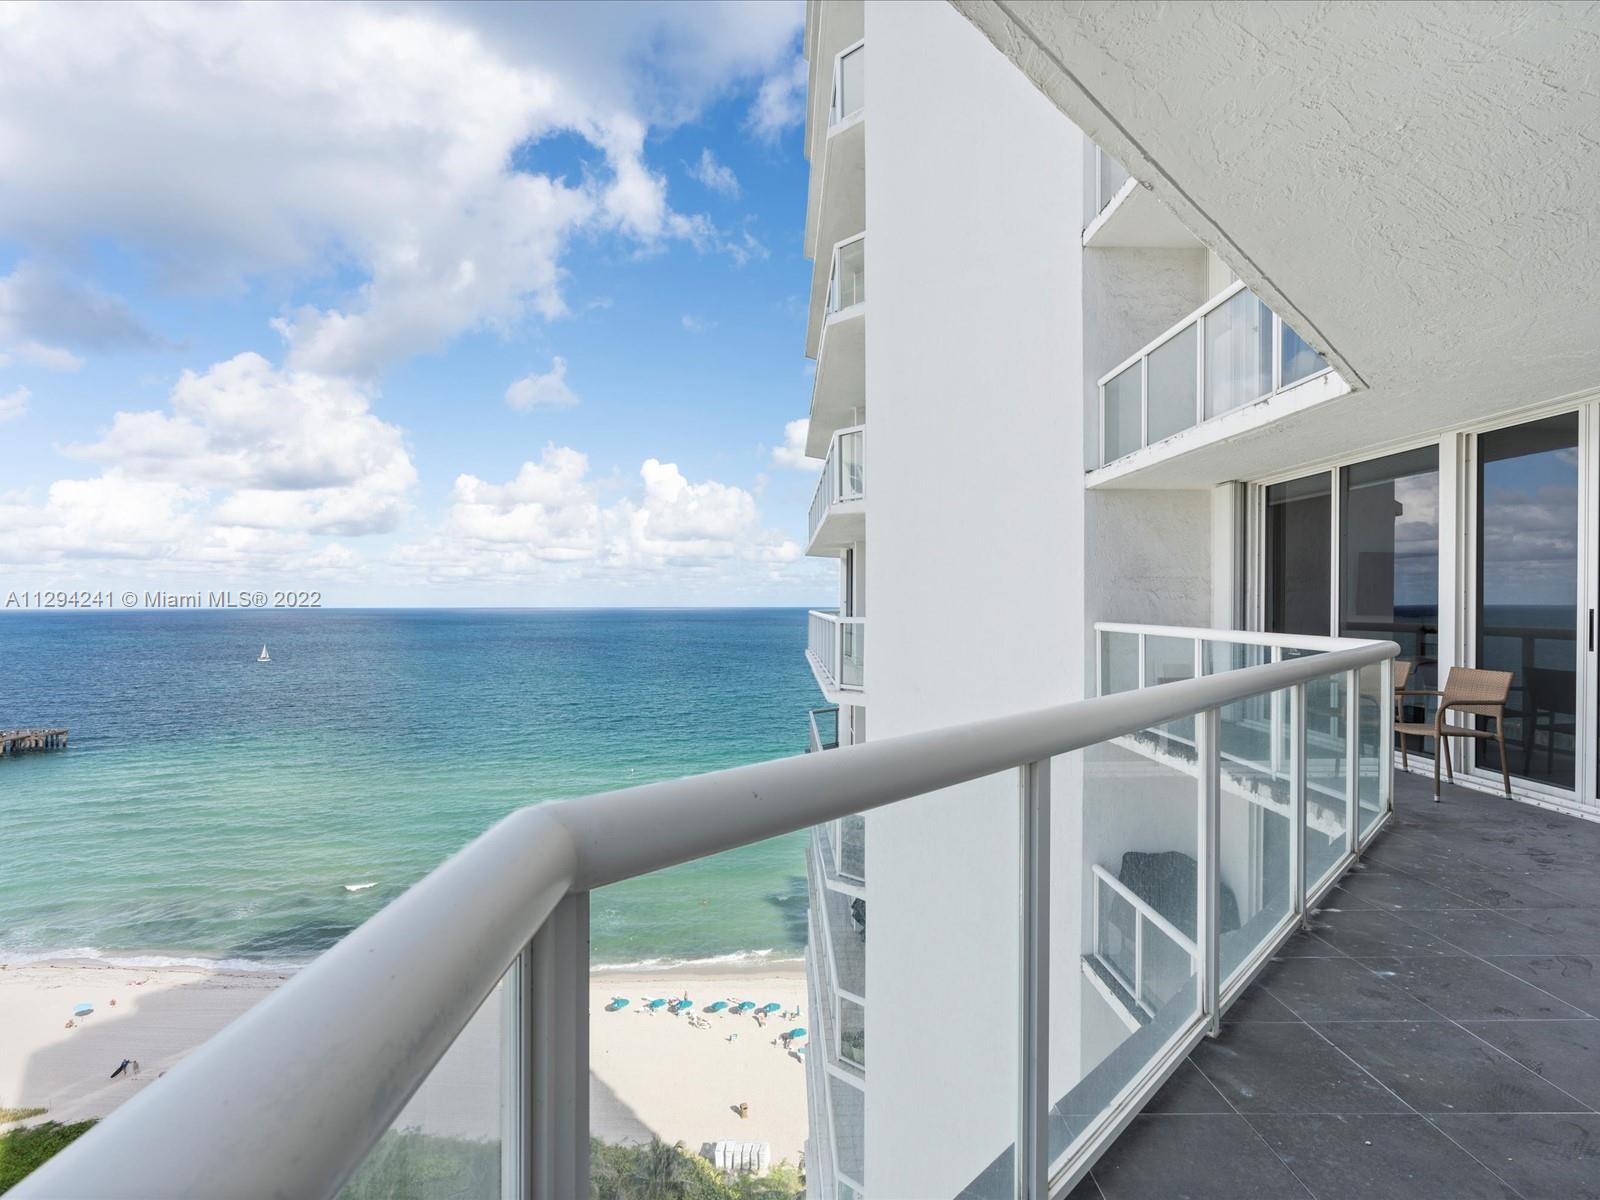 a view of a balcony with ocean view